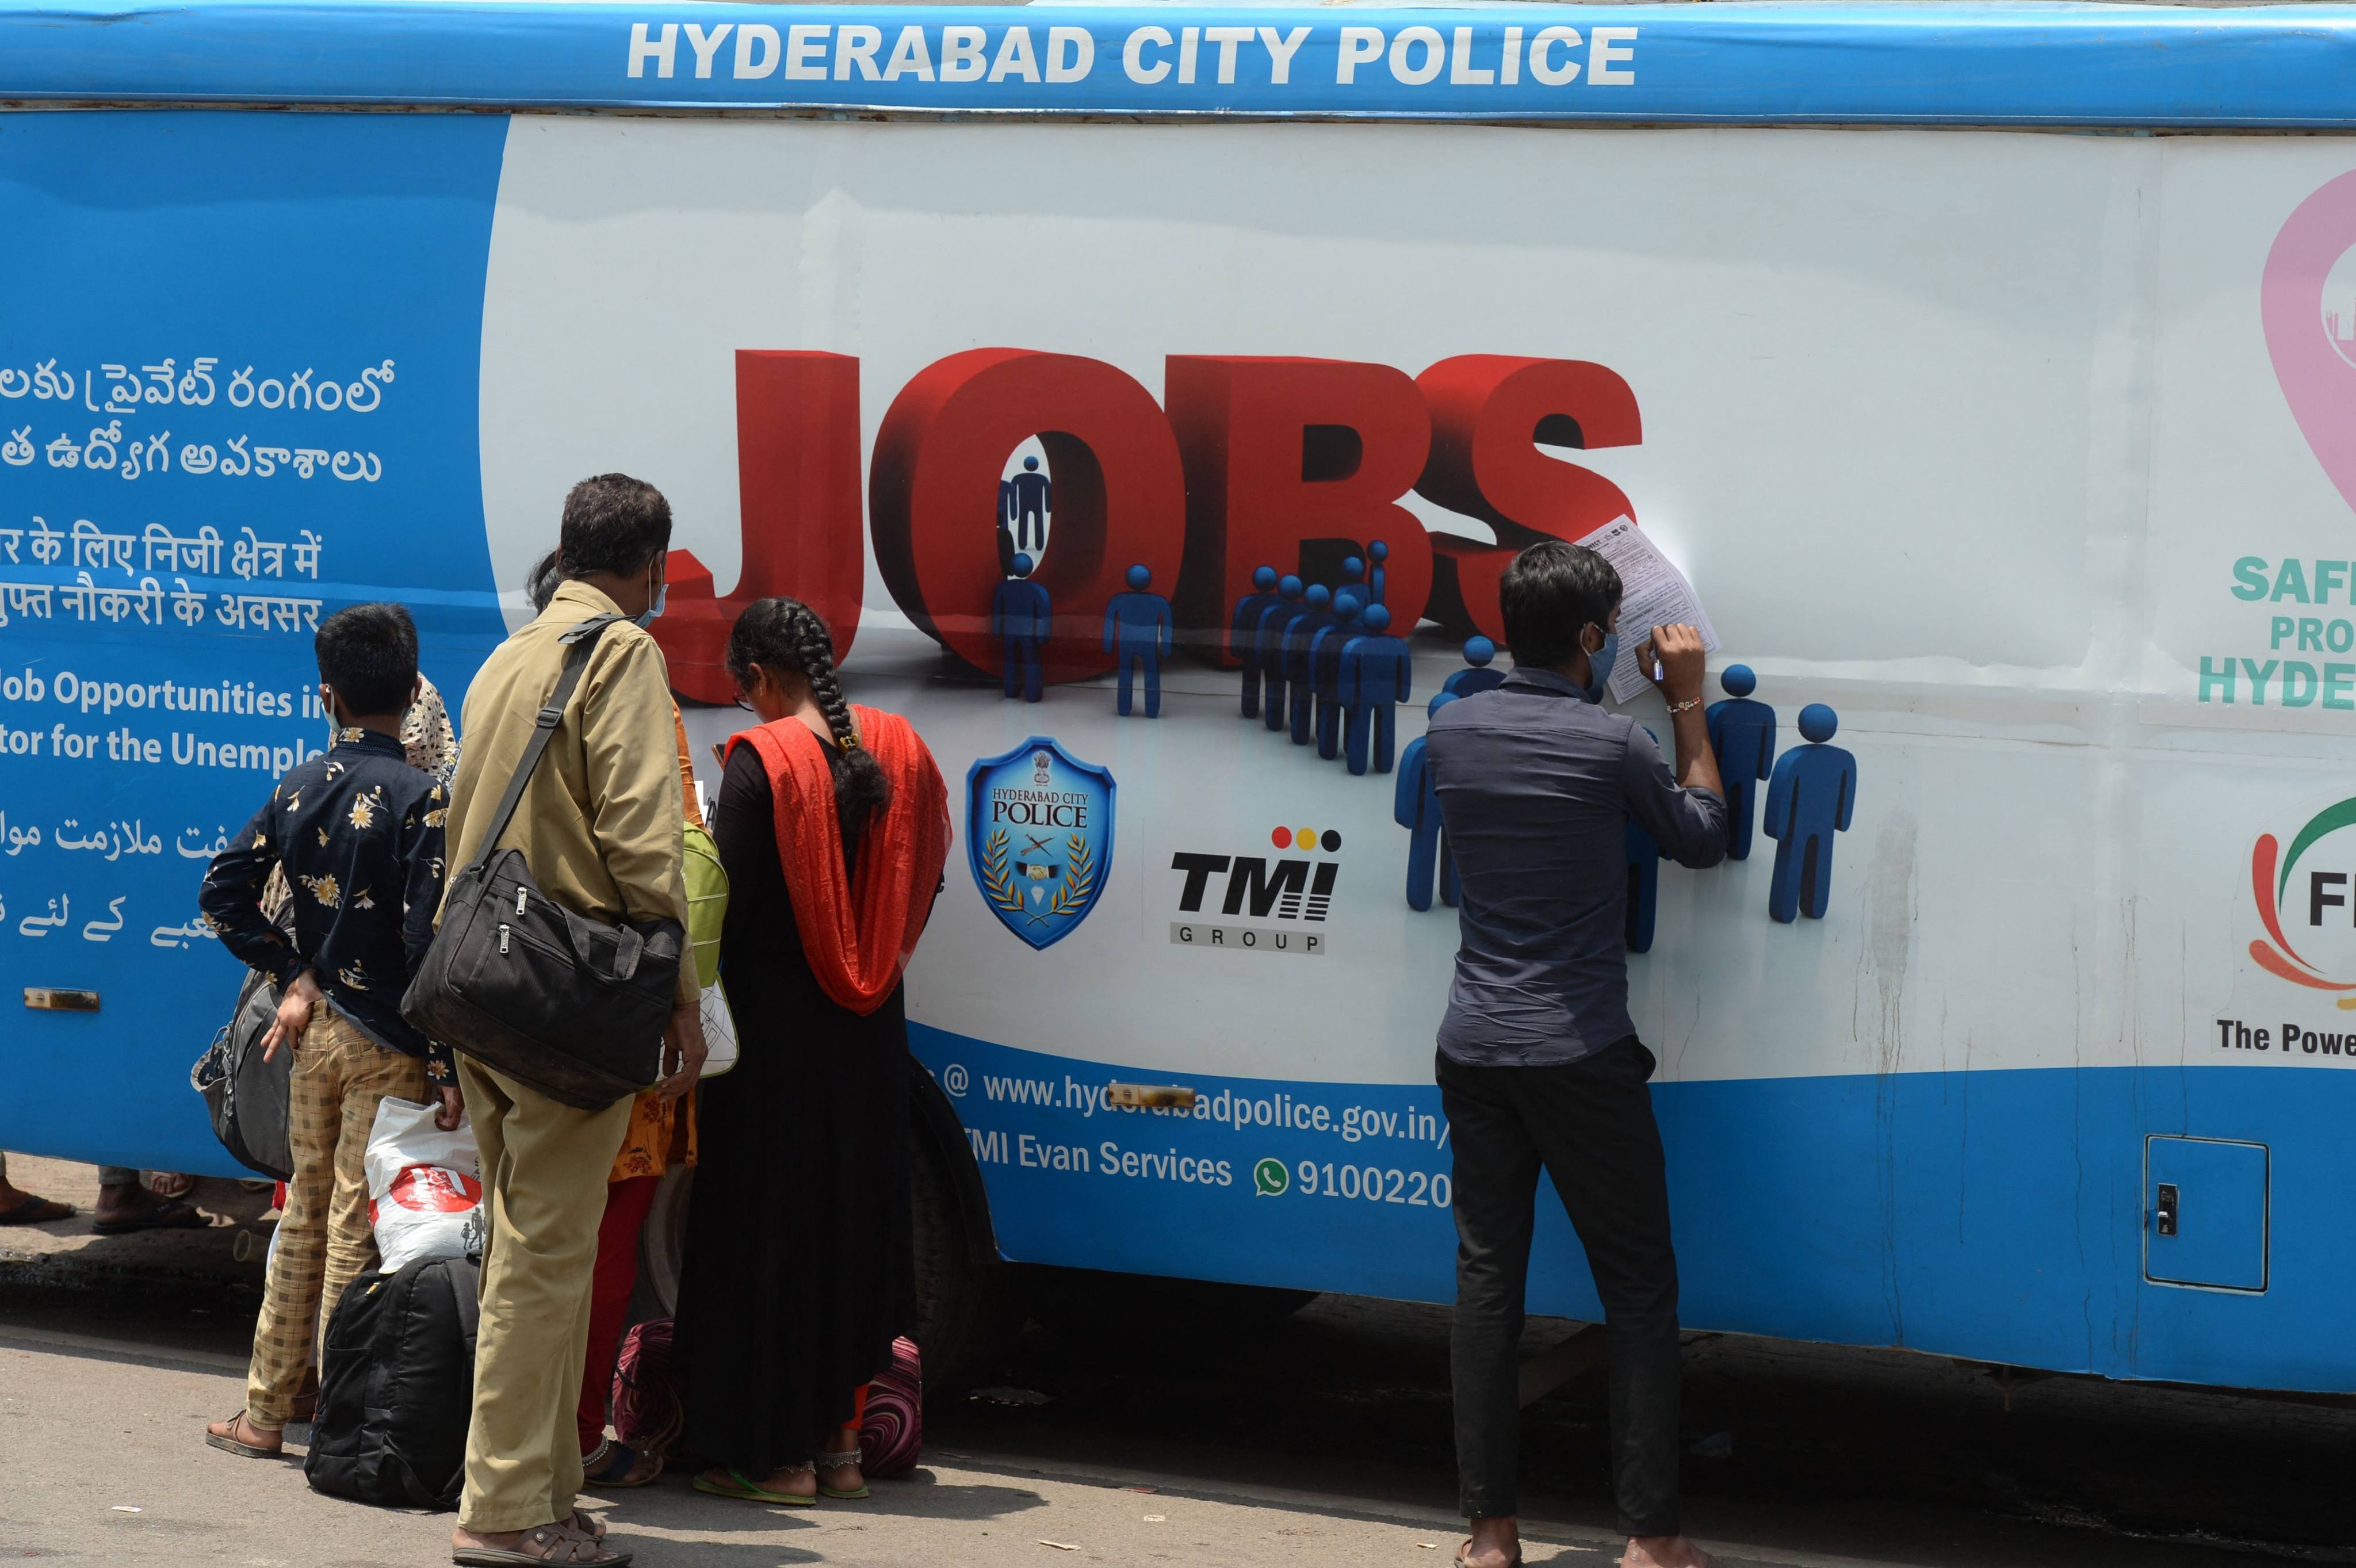 Unemployed youths fill application forms to access job openings in the private sector in Hyderabad, India. Photo: AFP